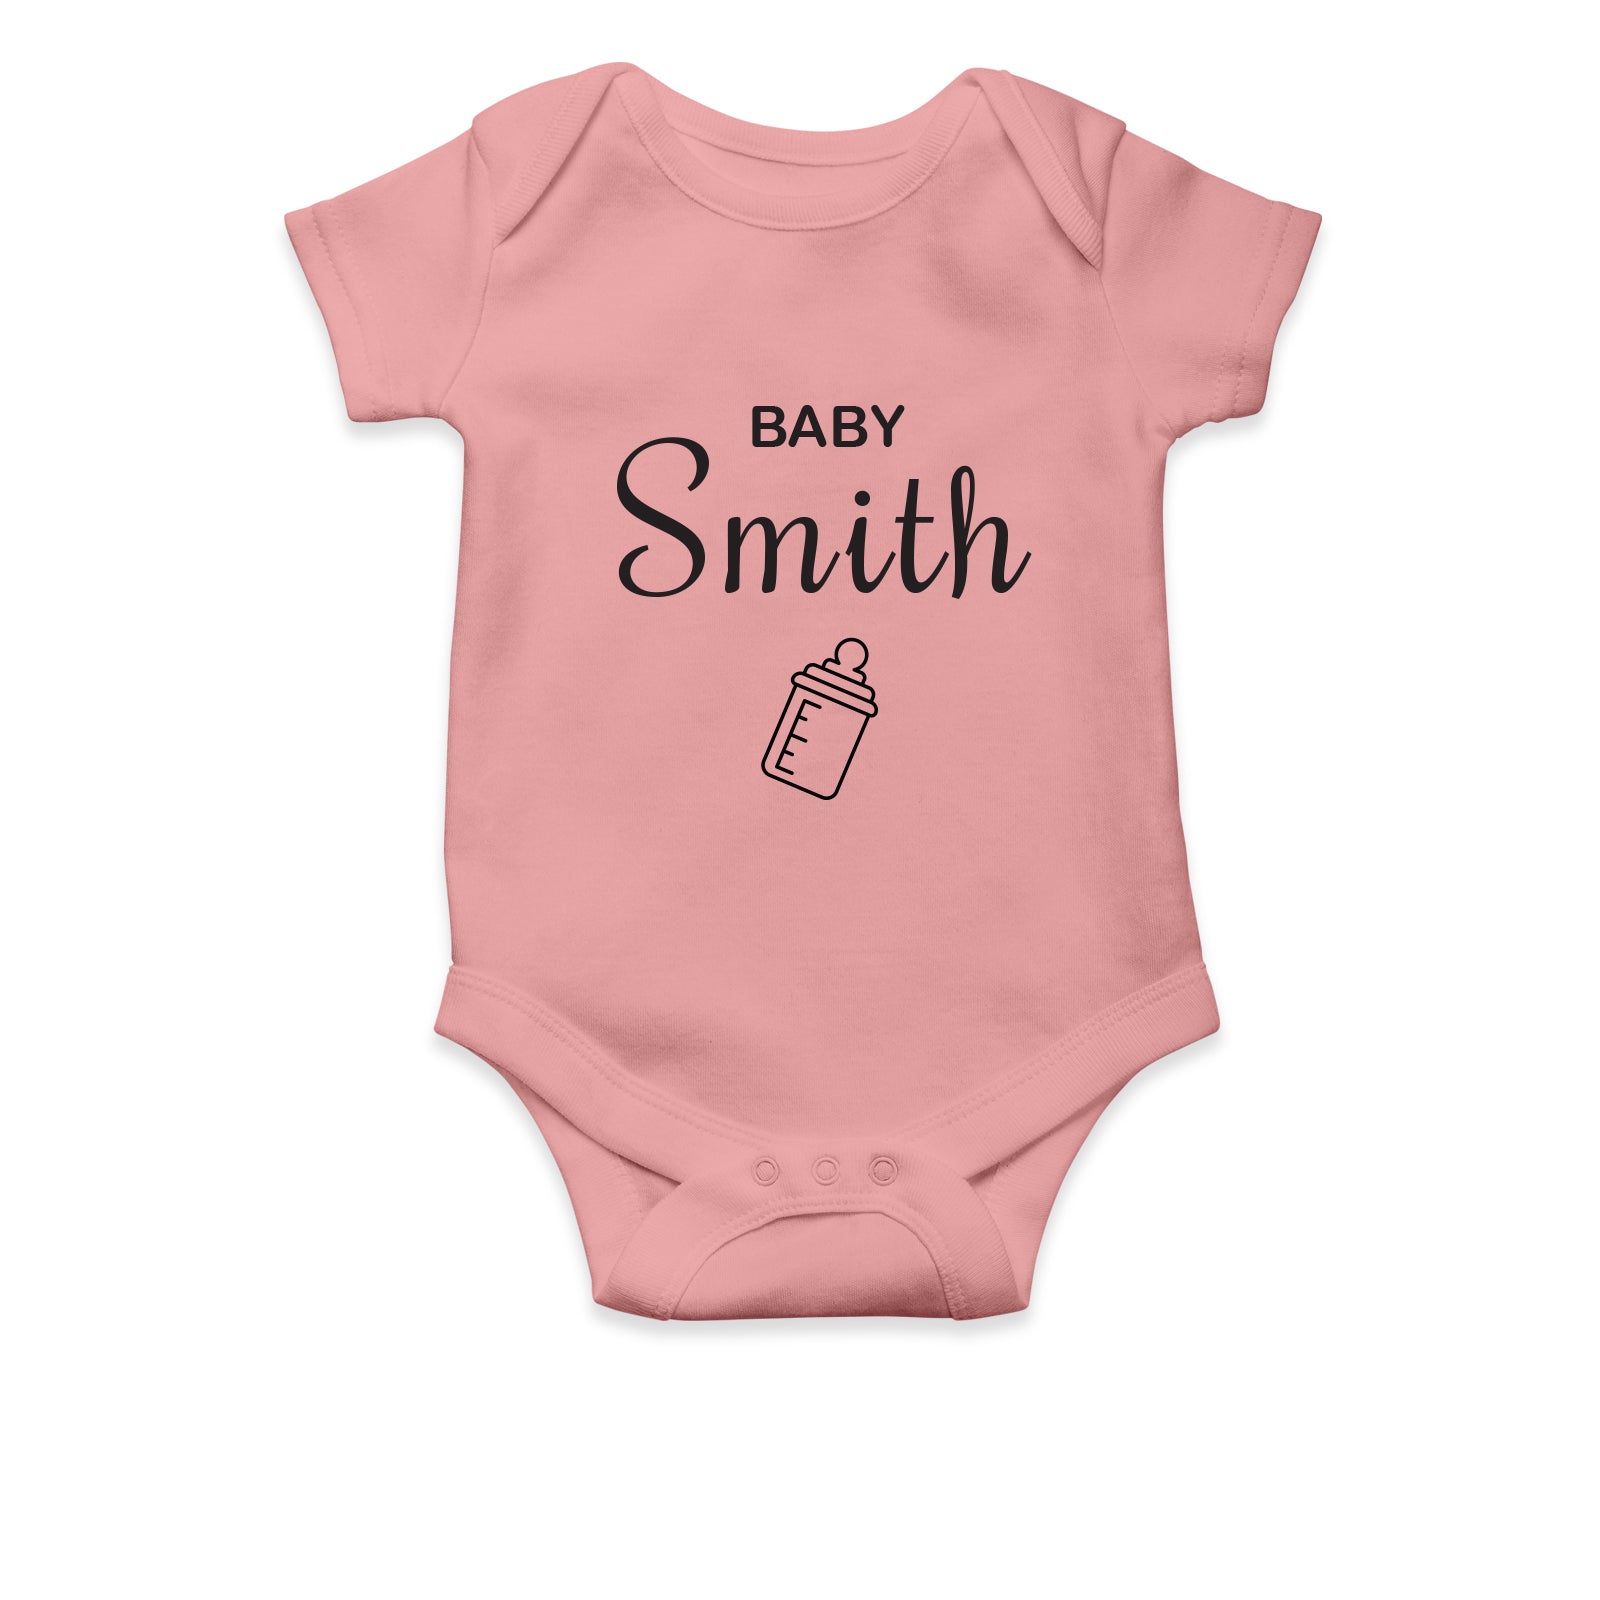 Personalised White Baby Body Suit Grow Vest - Little Bottle